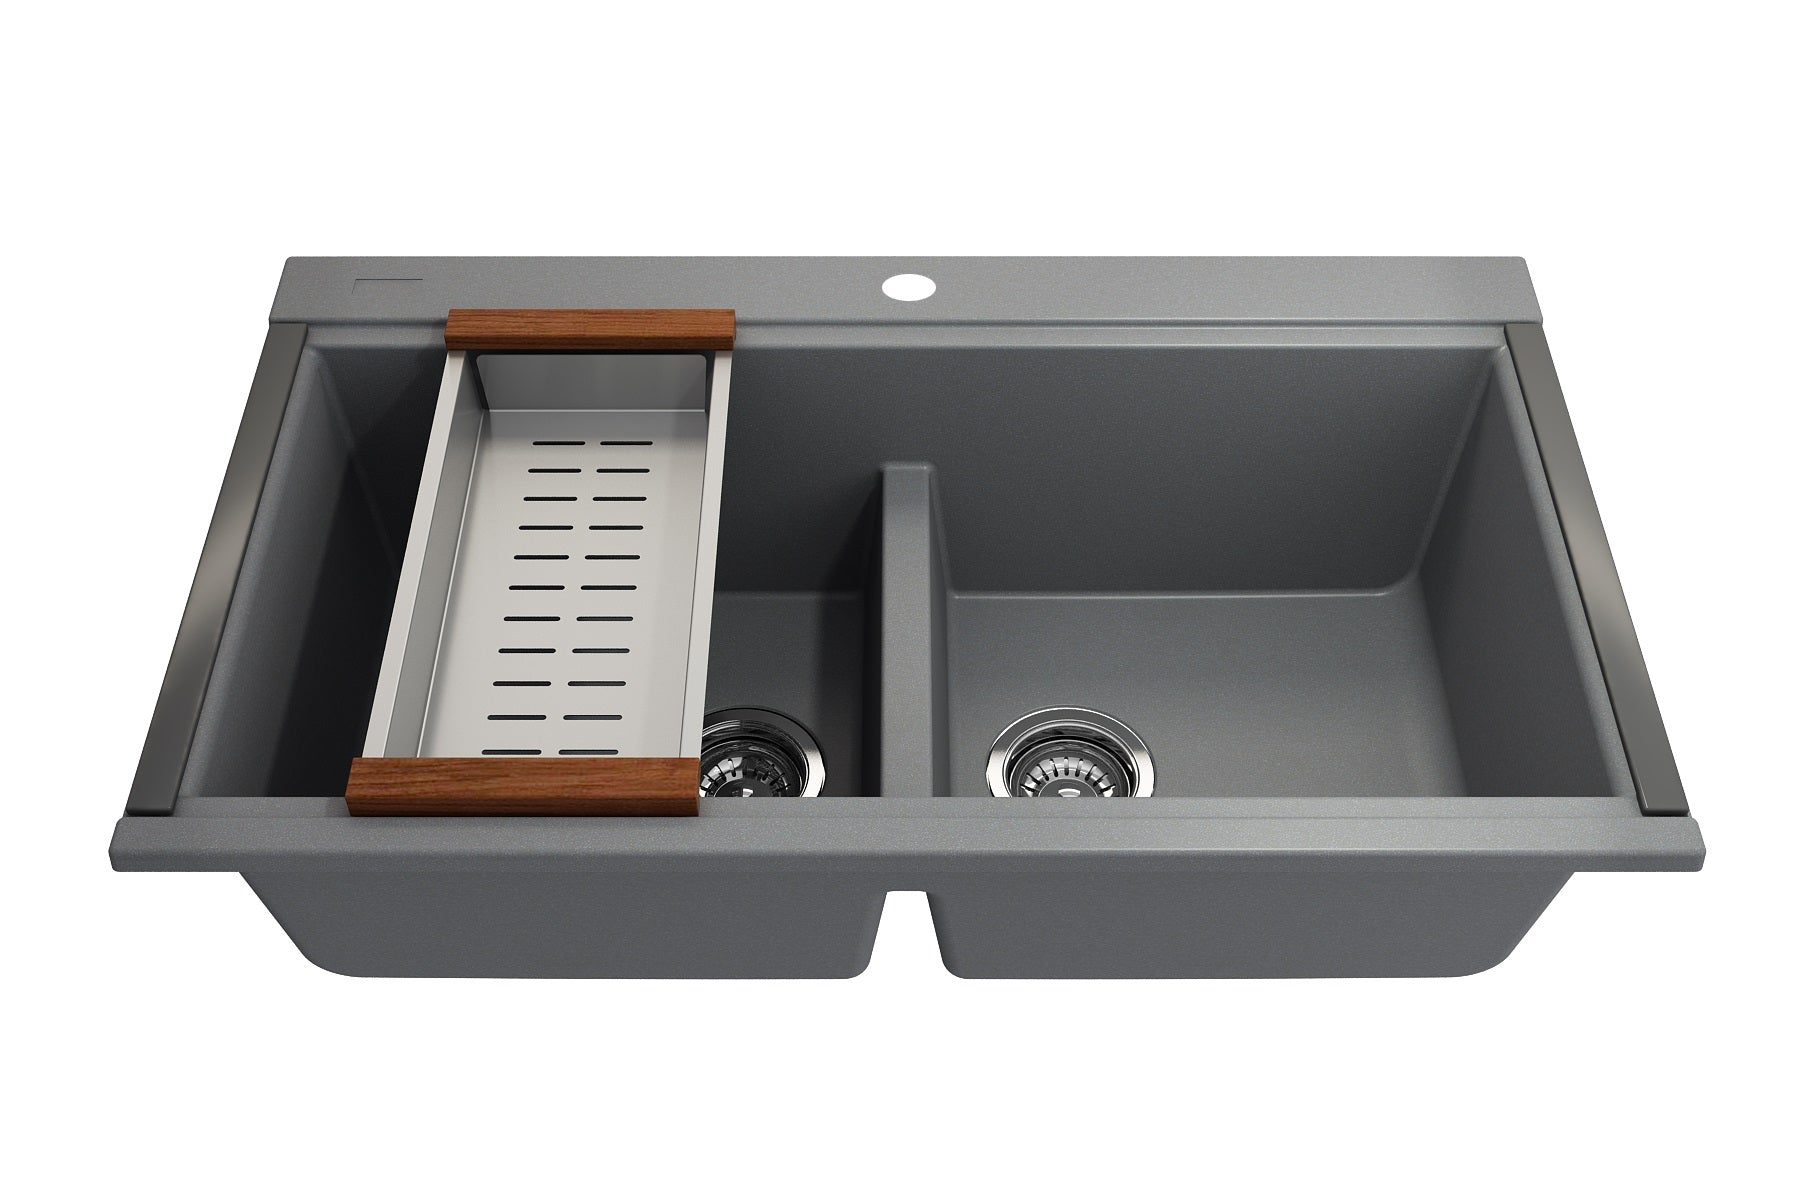 Bocchi 34" Undermount Double Bowl Composite Workstation Kitchen Sink with Covers in Concrete Gray